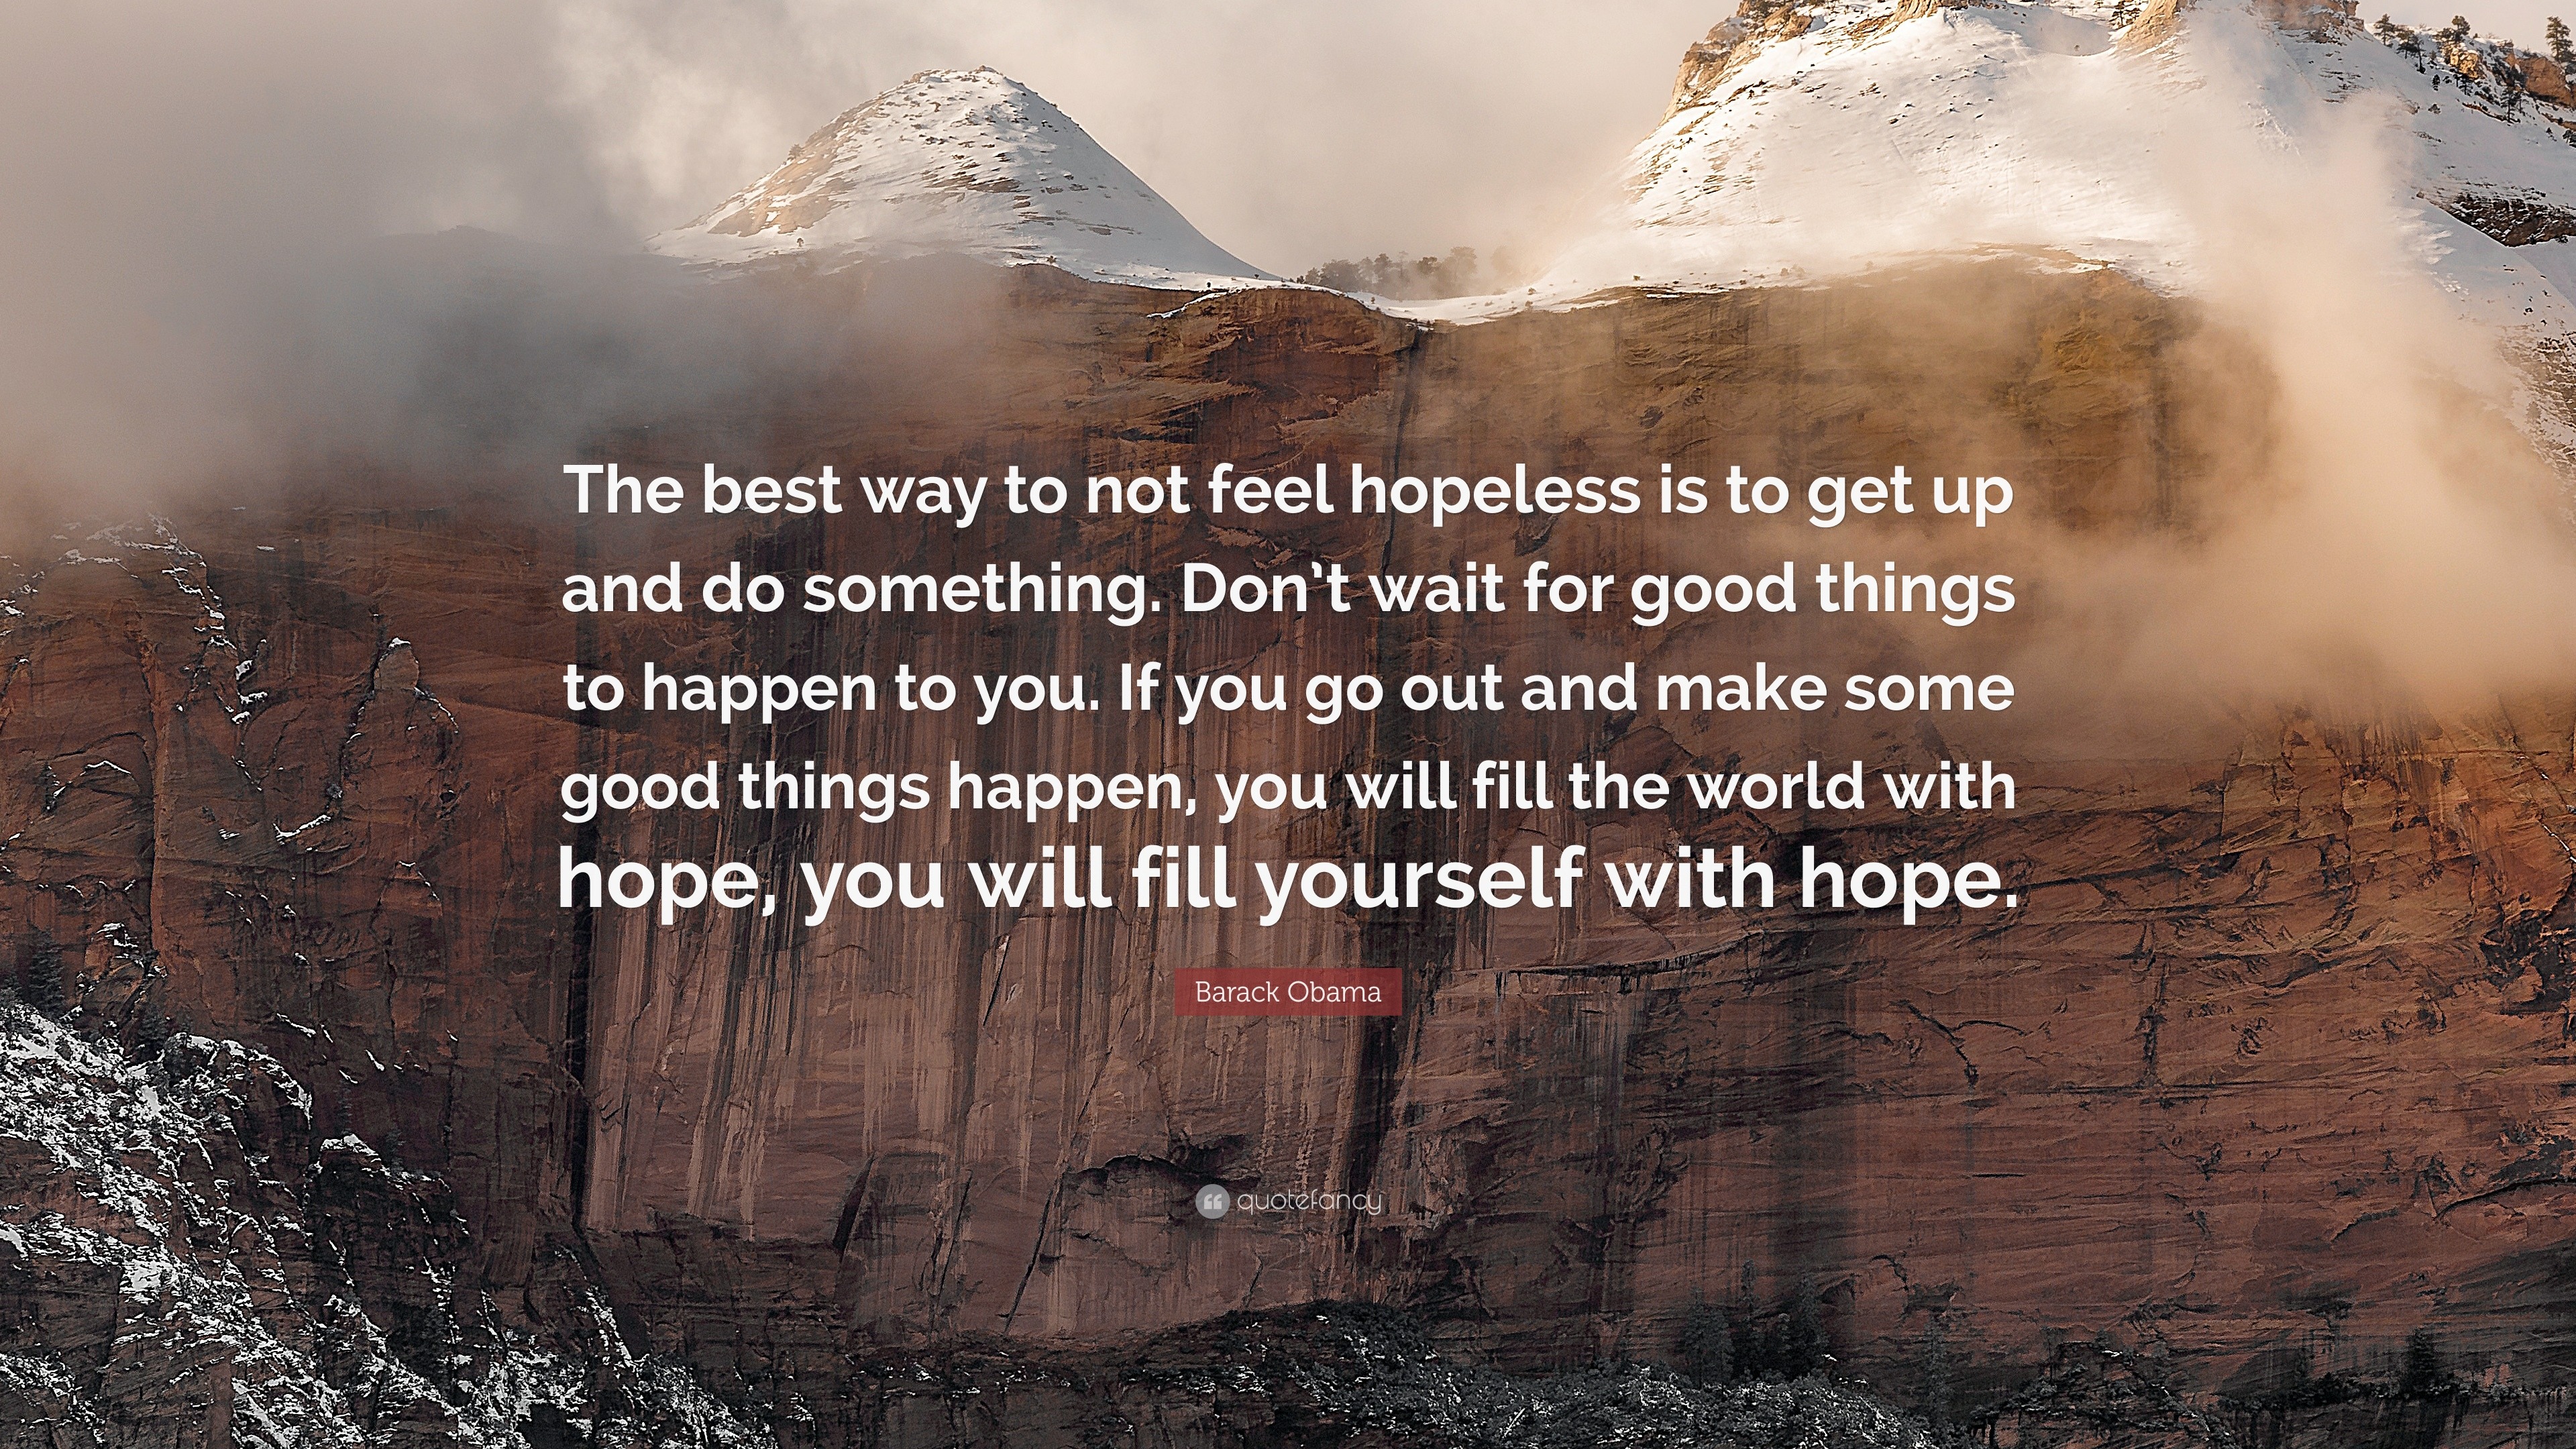 Barack Obama Quote “The best way to not feel hopeless is